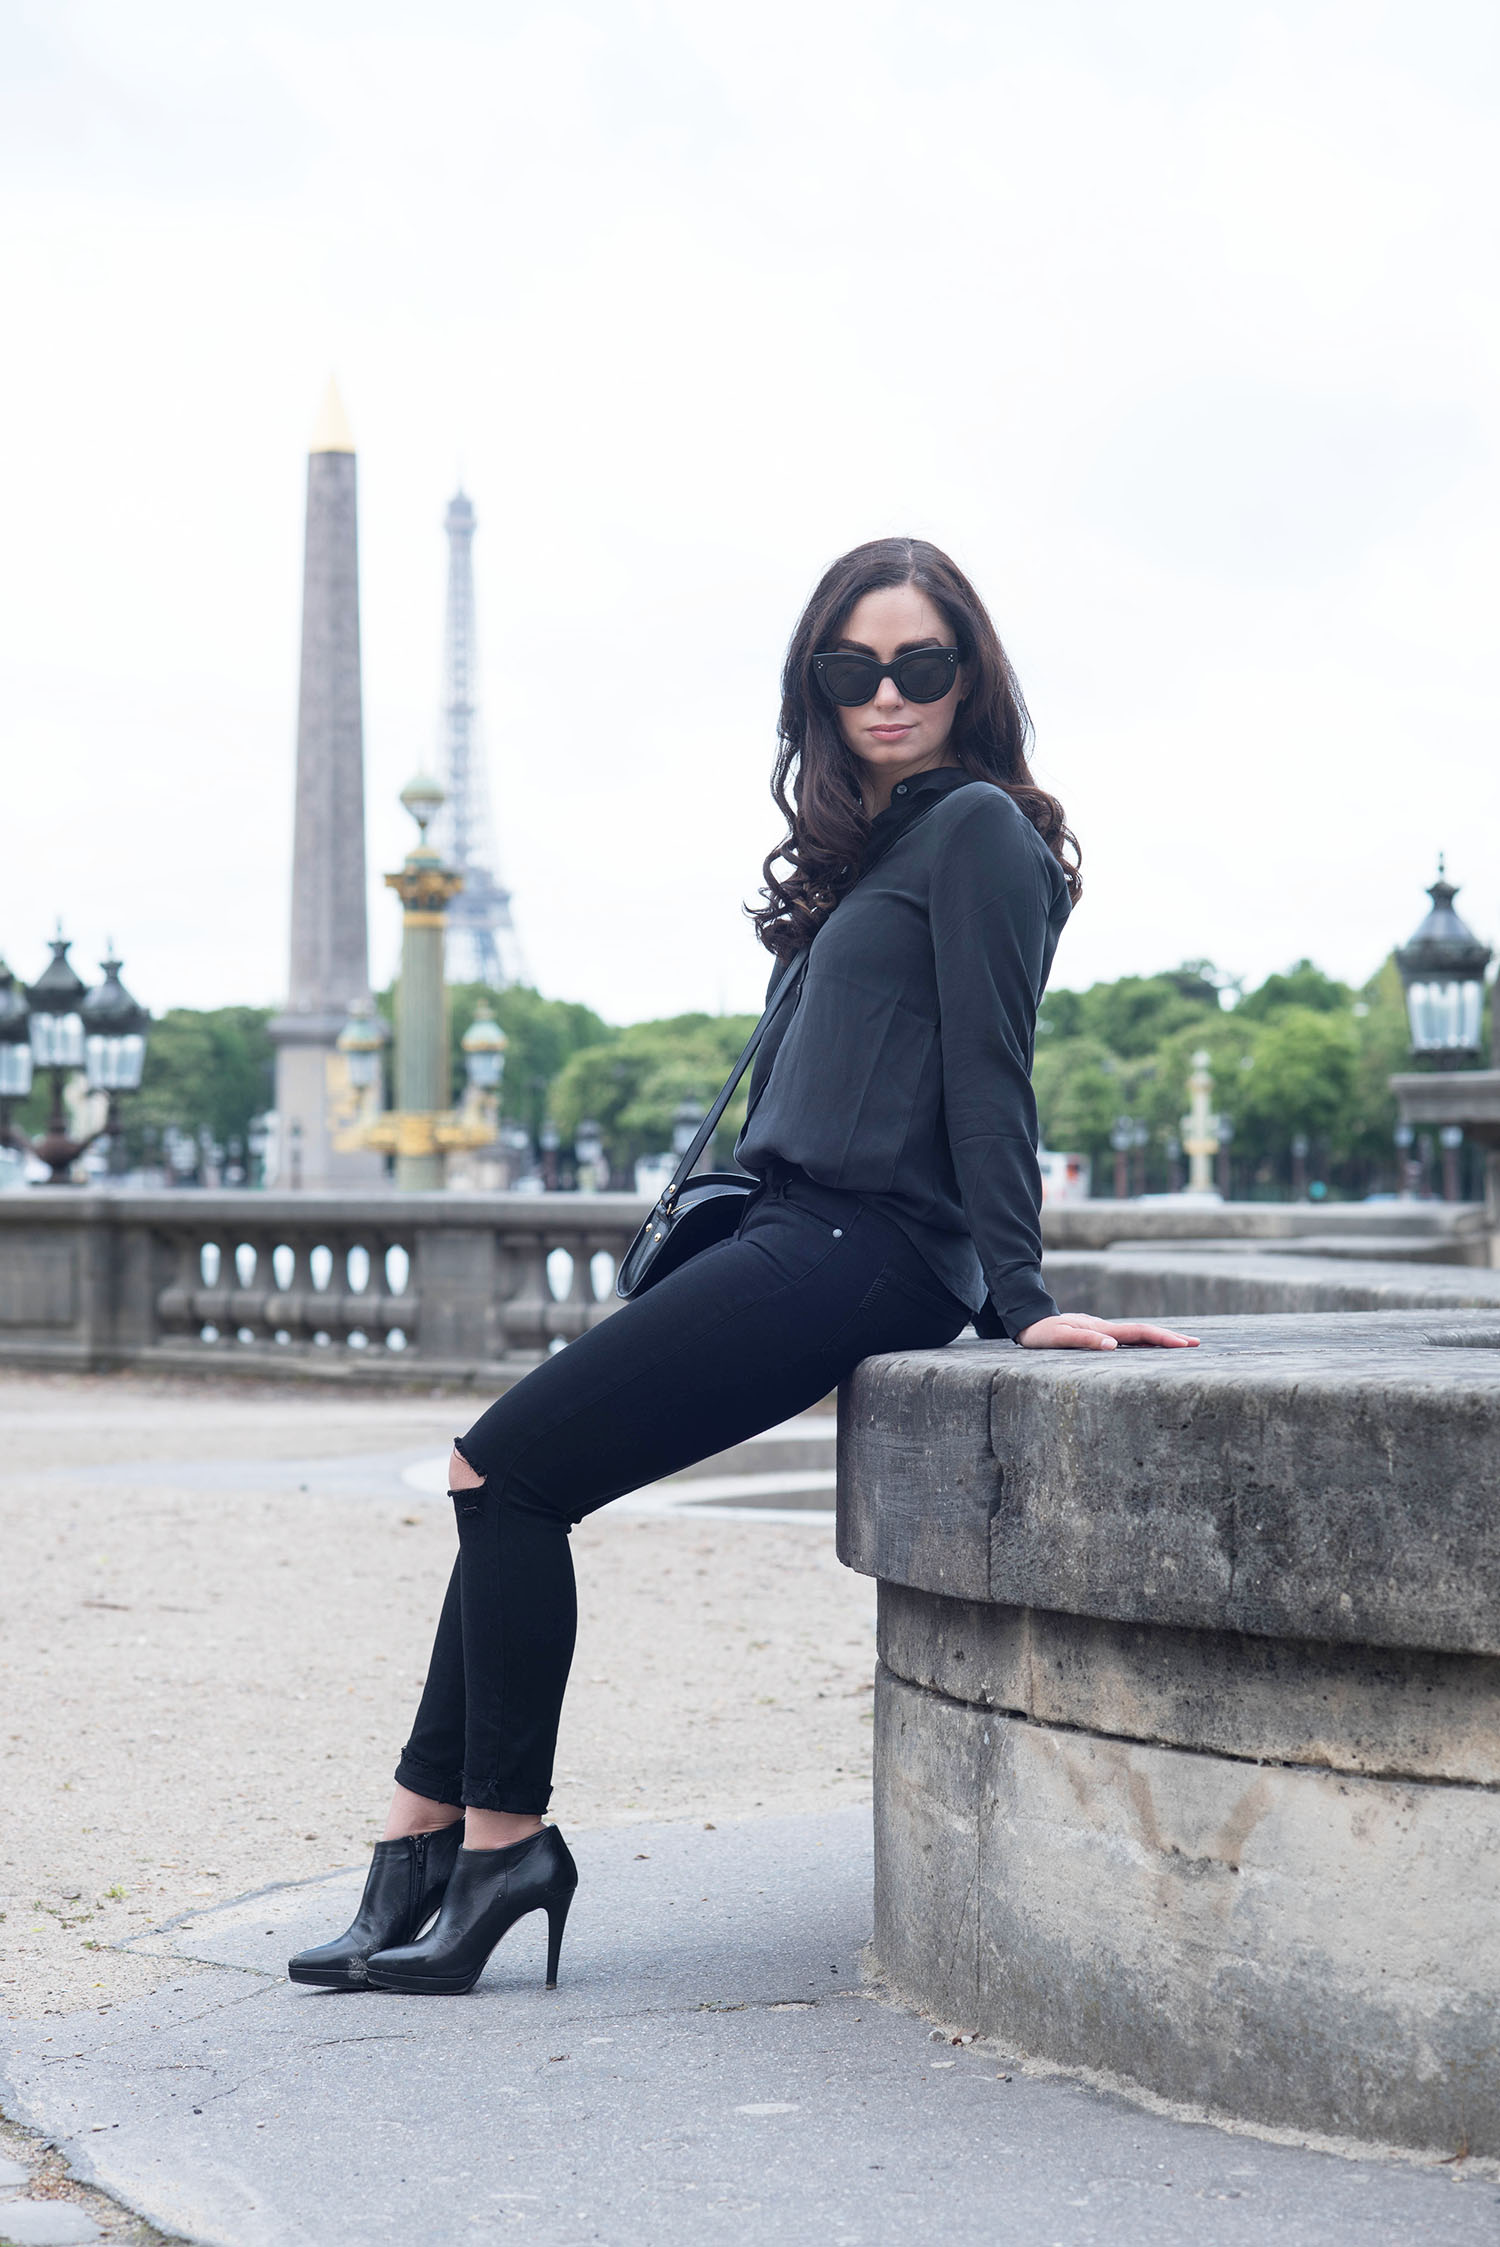 Fashion blogger Cee Fardoe of Coco & Vera sits at Place de la Concorde in Paris, wearing an Everlane silk blouse and Paige jeans